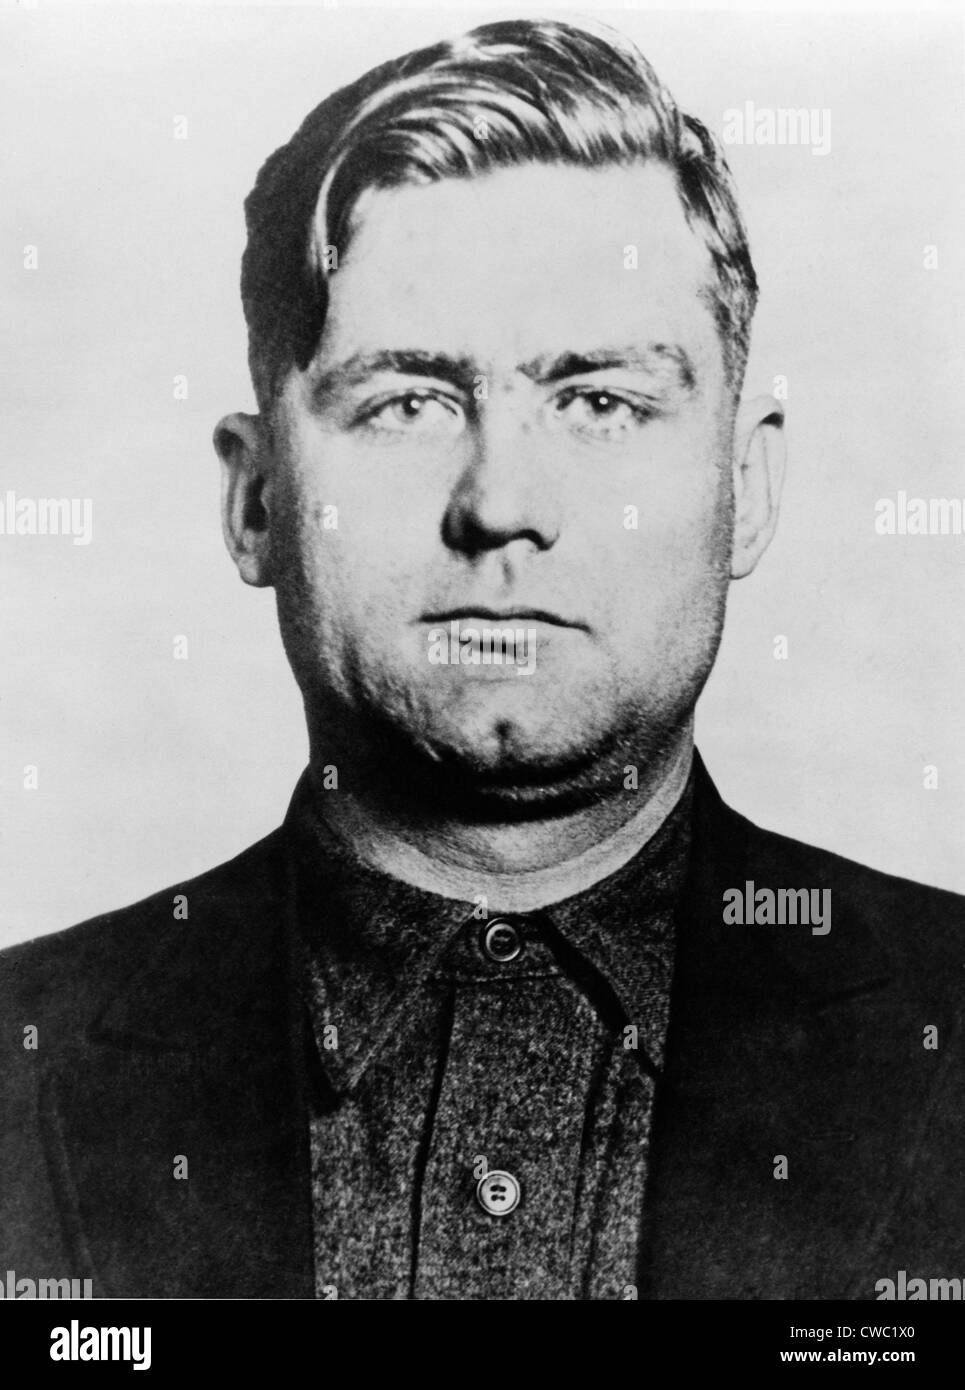 George 'Bugs' Moran 1891-1957 Chicago Gangster and Polish-Irish the boss of the North Side Gang a rival of Al Capone's mob. Stock Photo